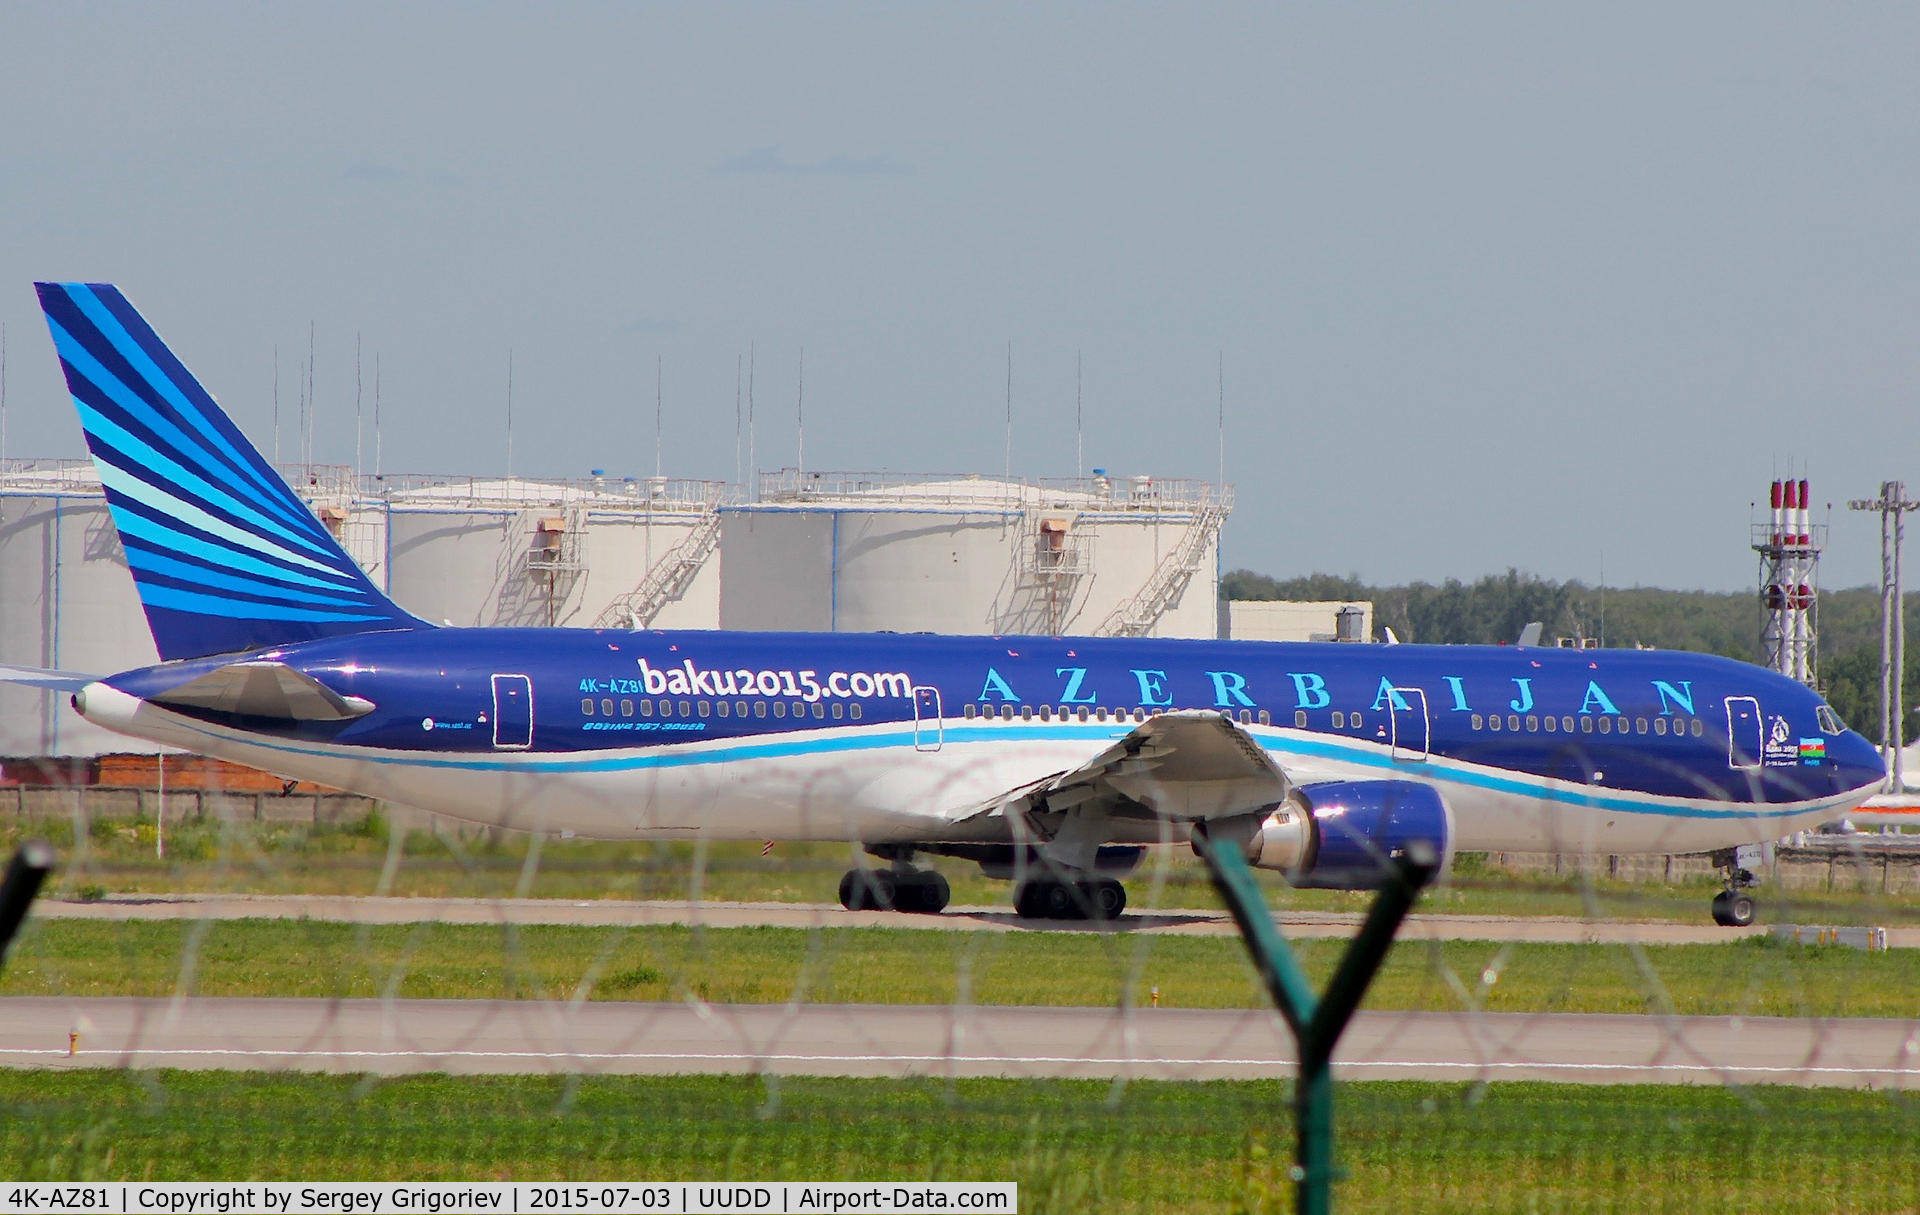 4K-AZ81, 2011 Boeing 767-32L/ER C/N 40343, 4K-AZ81 B763 AHY (AZAL)
03.07.2015 UUDD/DME Domodedovo, Moscow, RF